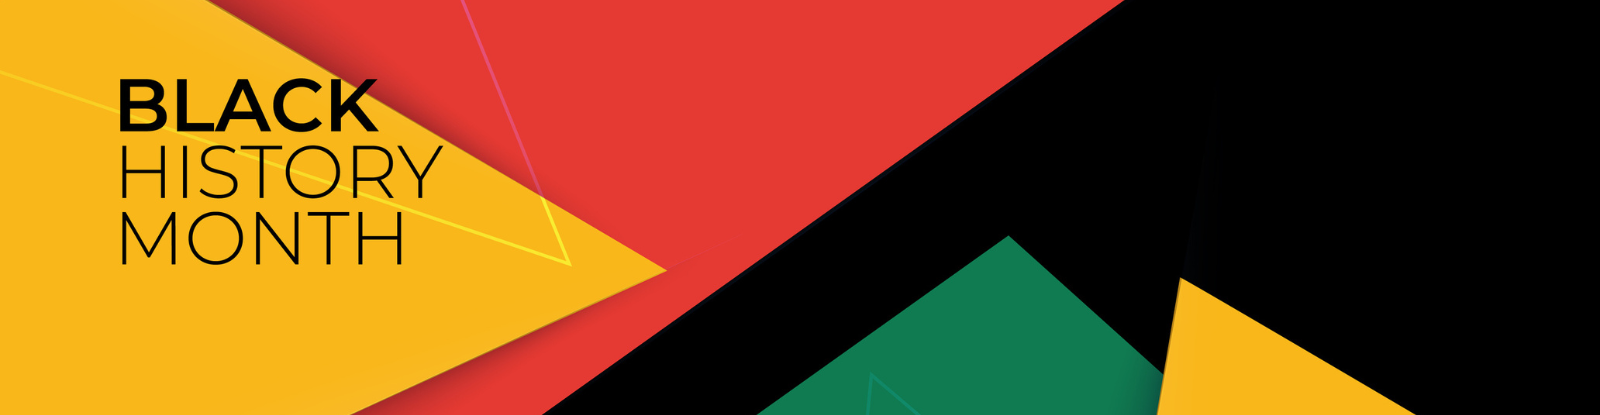 Yellow, red and green geometric shapes in the background with the words "Black History Month" overtop.